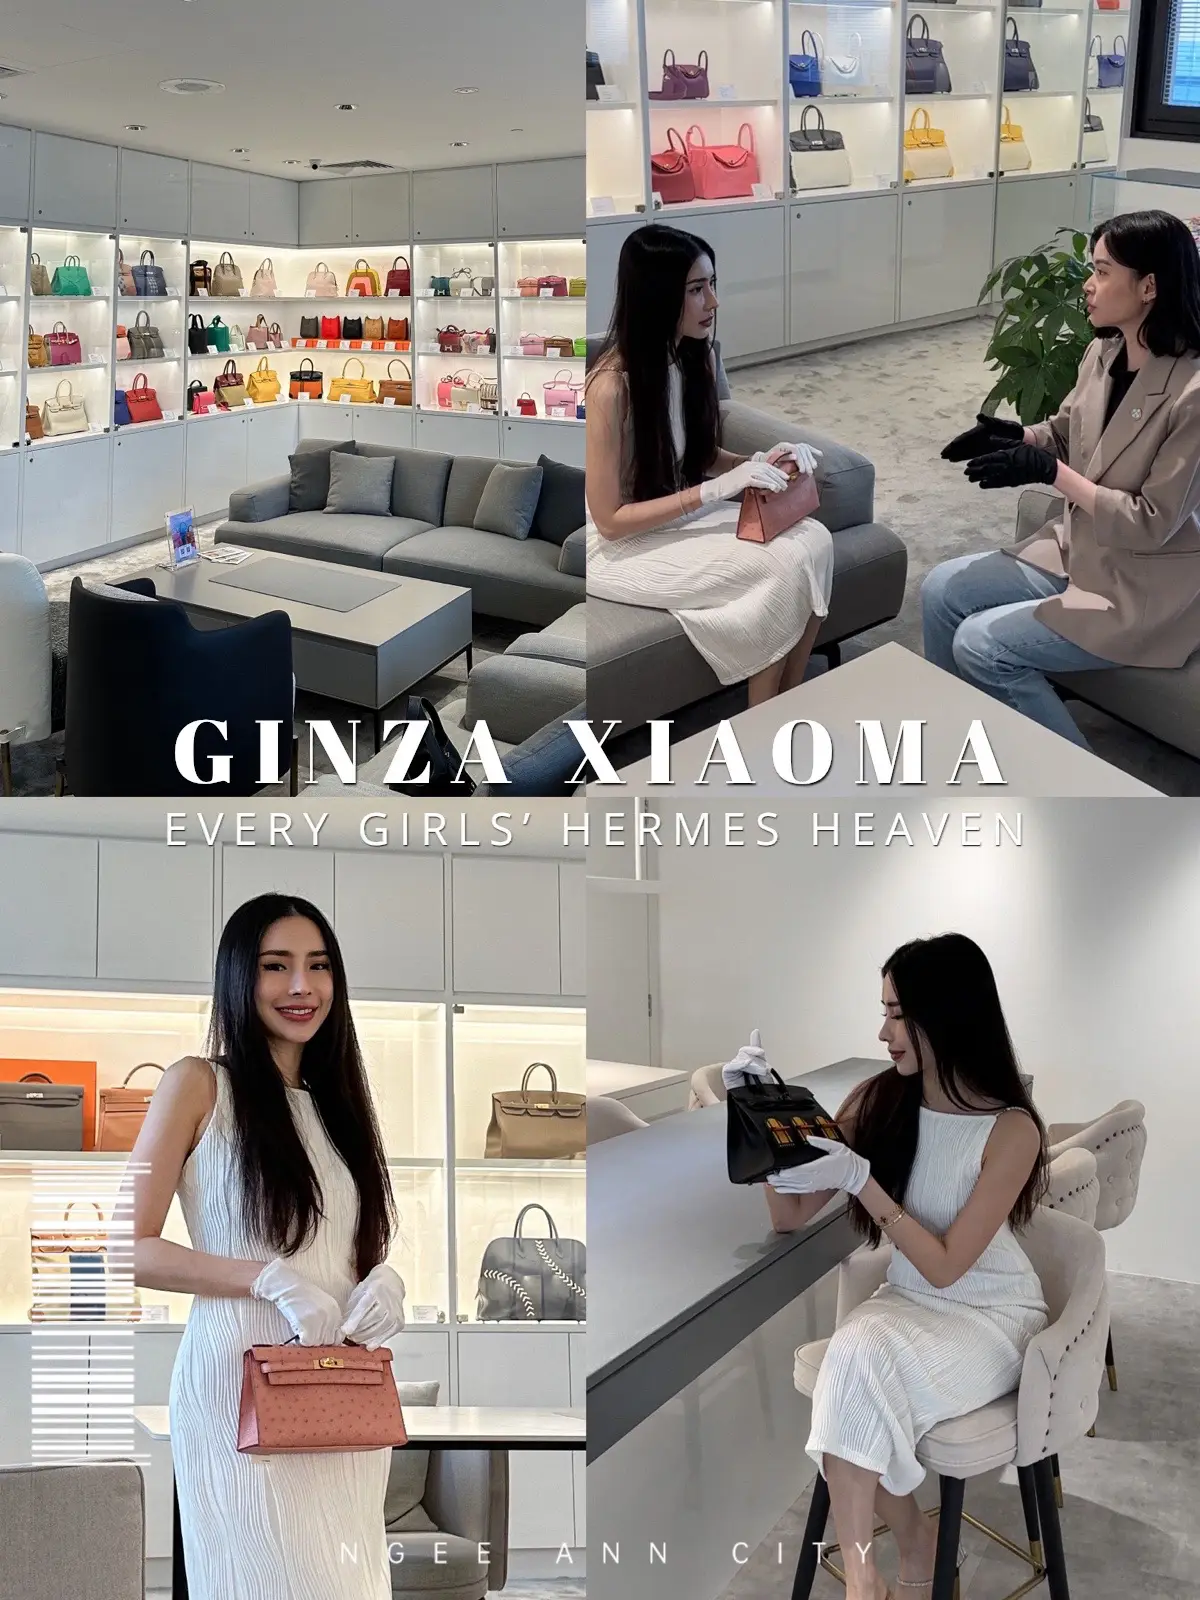 GINZA XIAOMA  Singapore on Instagram: Luxury and exclusivity in